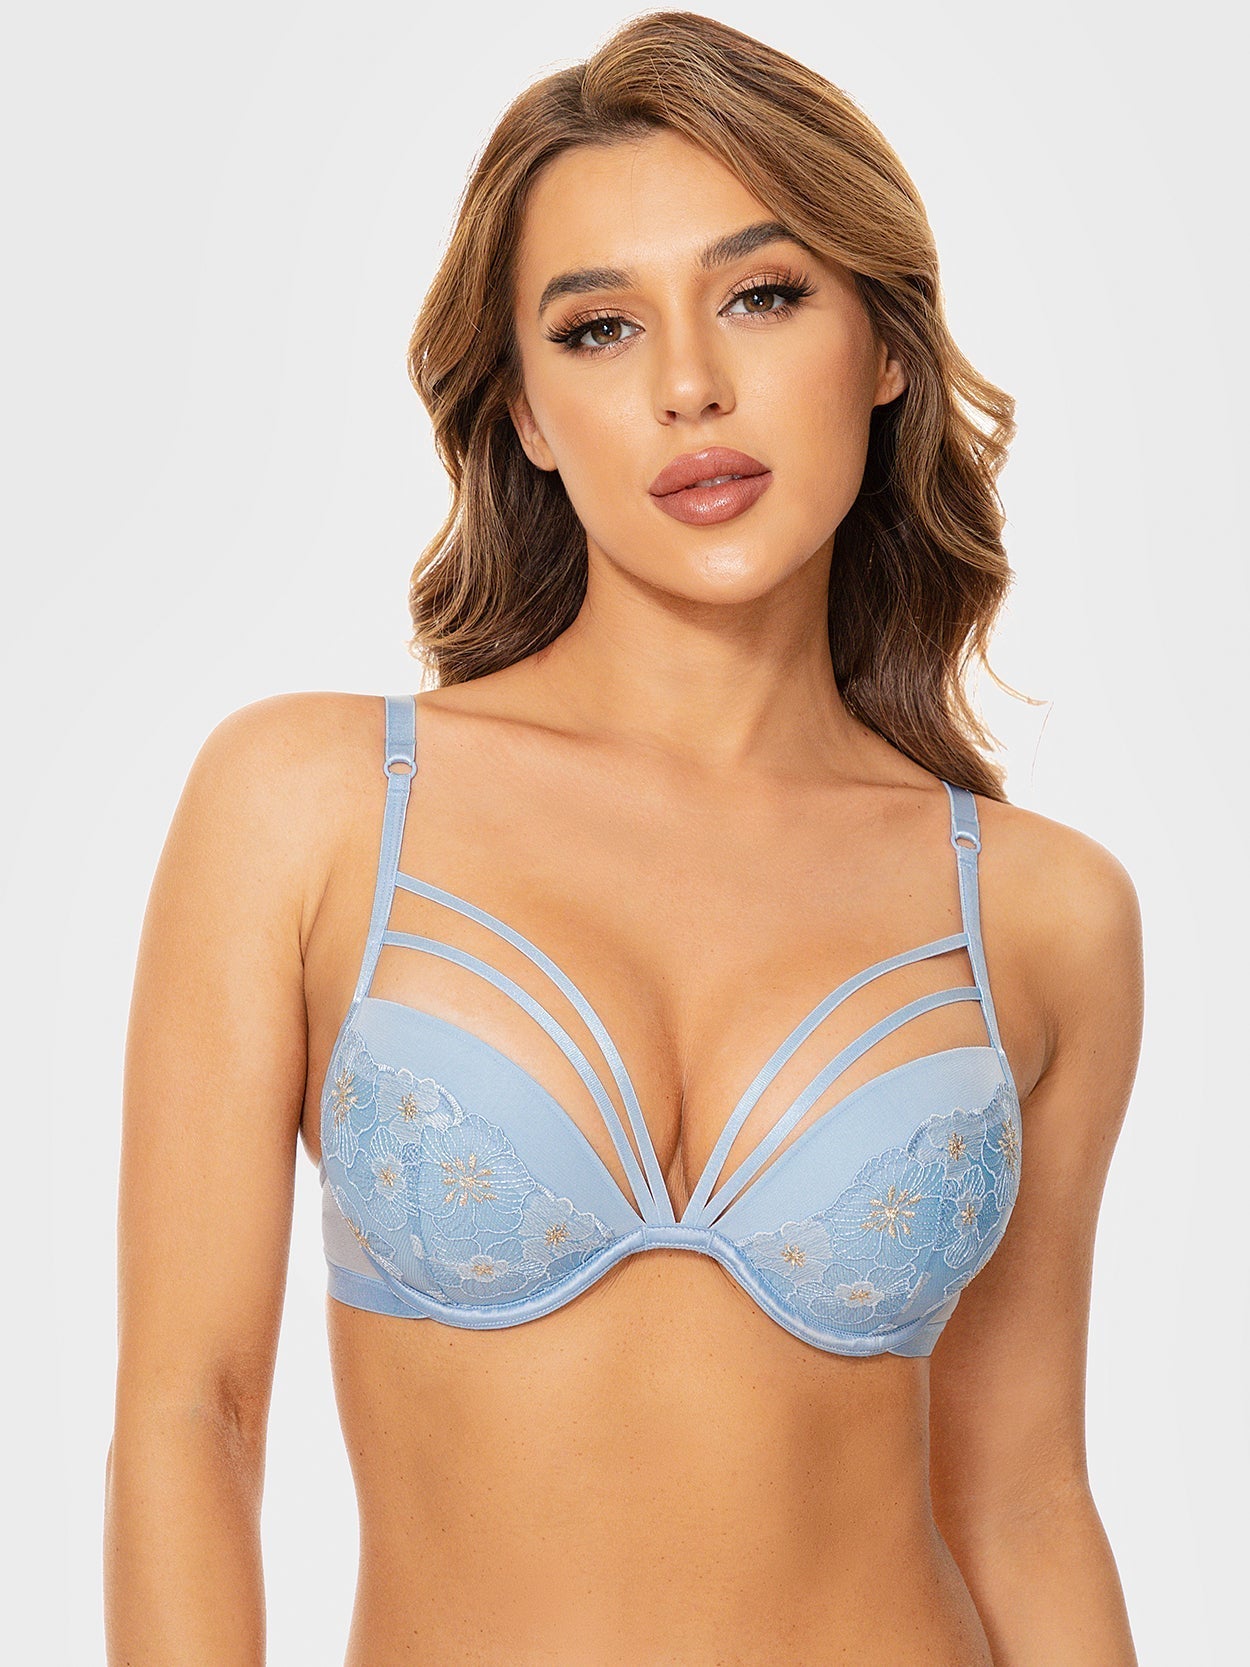 Floral Embroidered Plus Size Minimizer Balconette Push Up Bra With